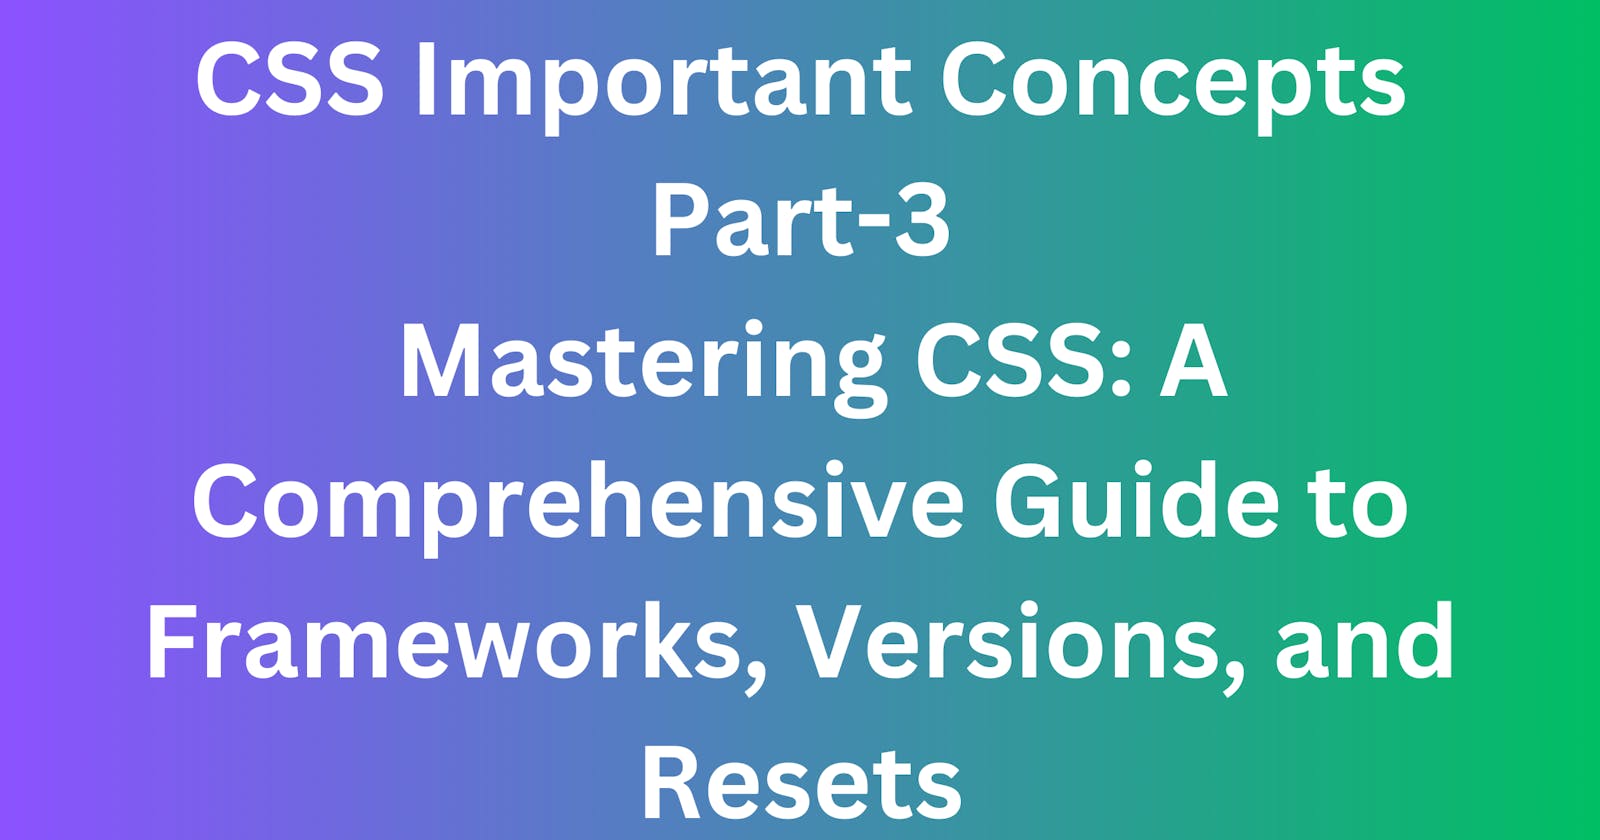 Mastering CSS: A Comprehensive Guide to Frameworks, Versions, and Resets